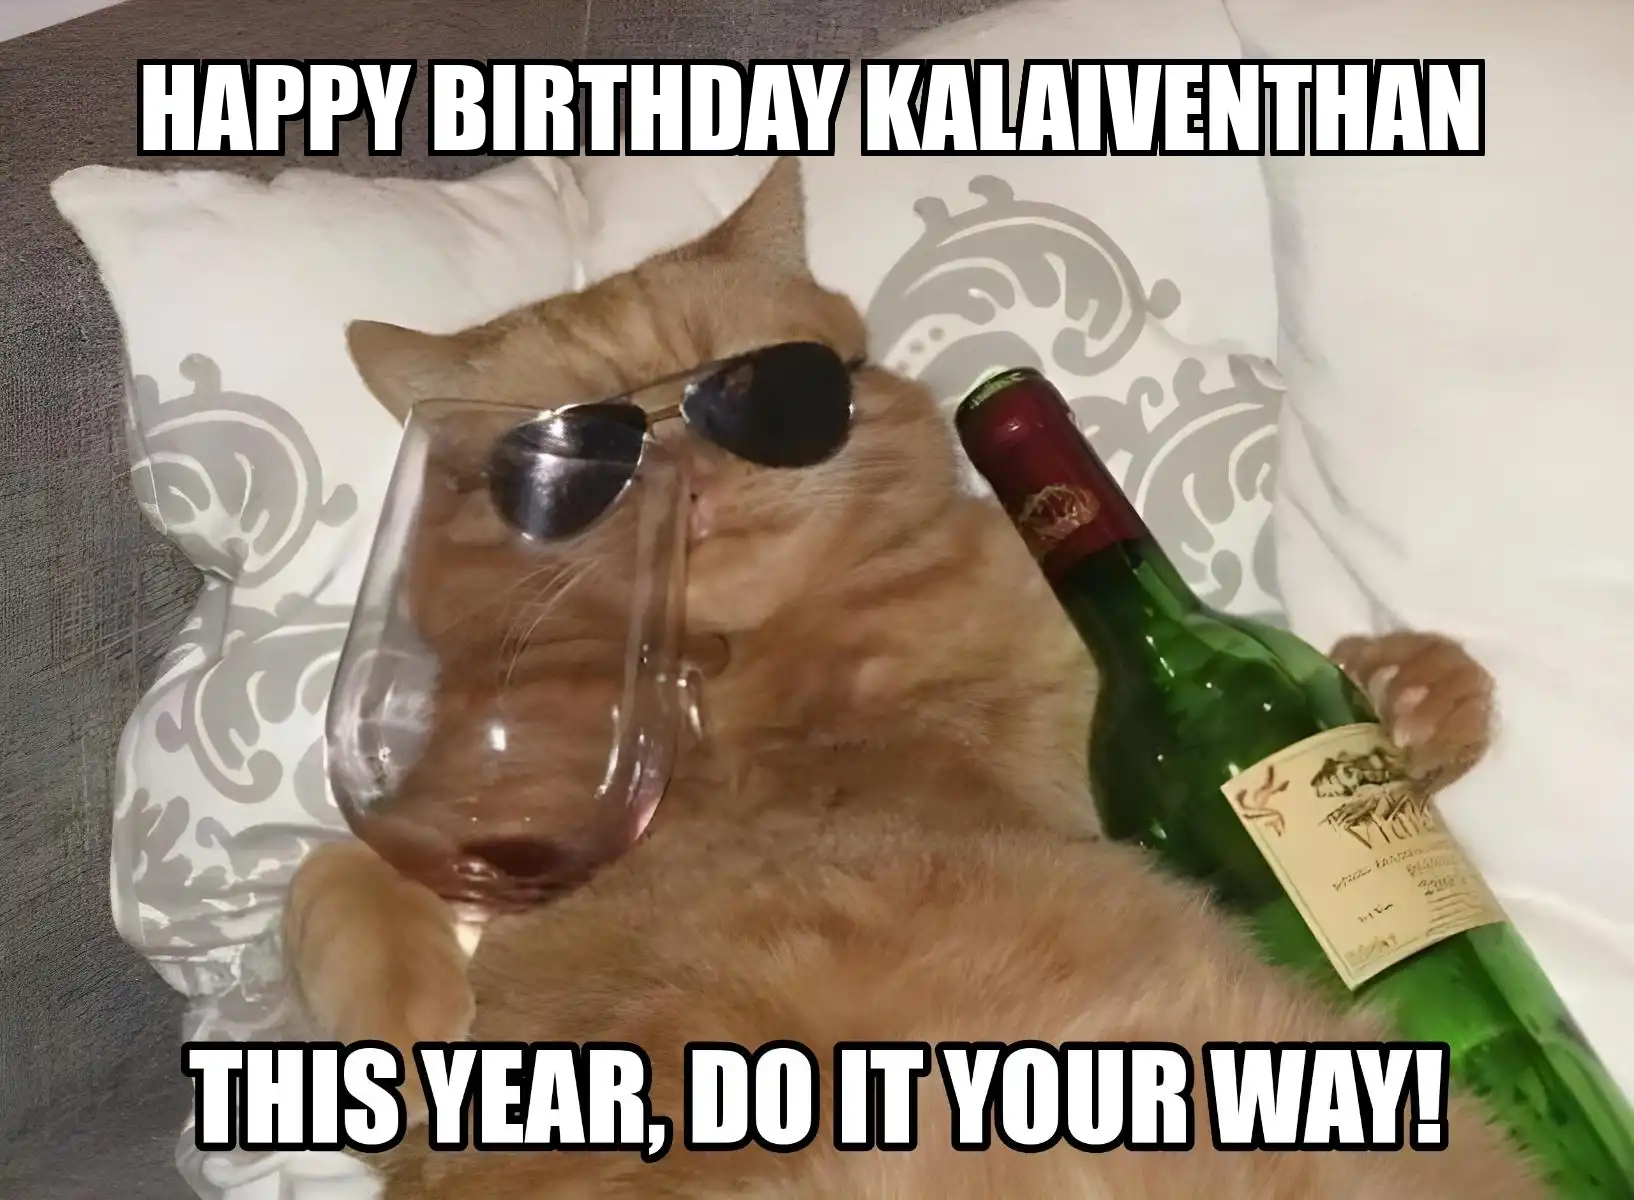 Happy Birthday Kalaiventhan This Year Do It Your Way Meme